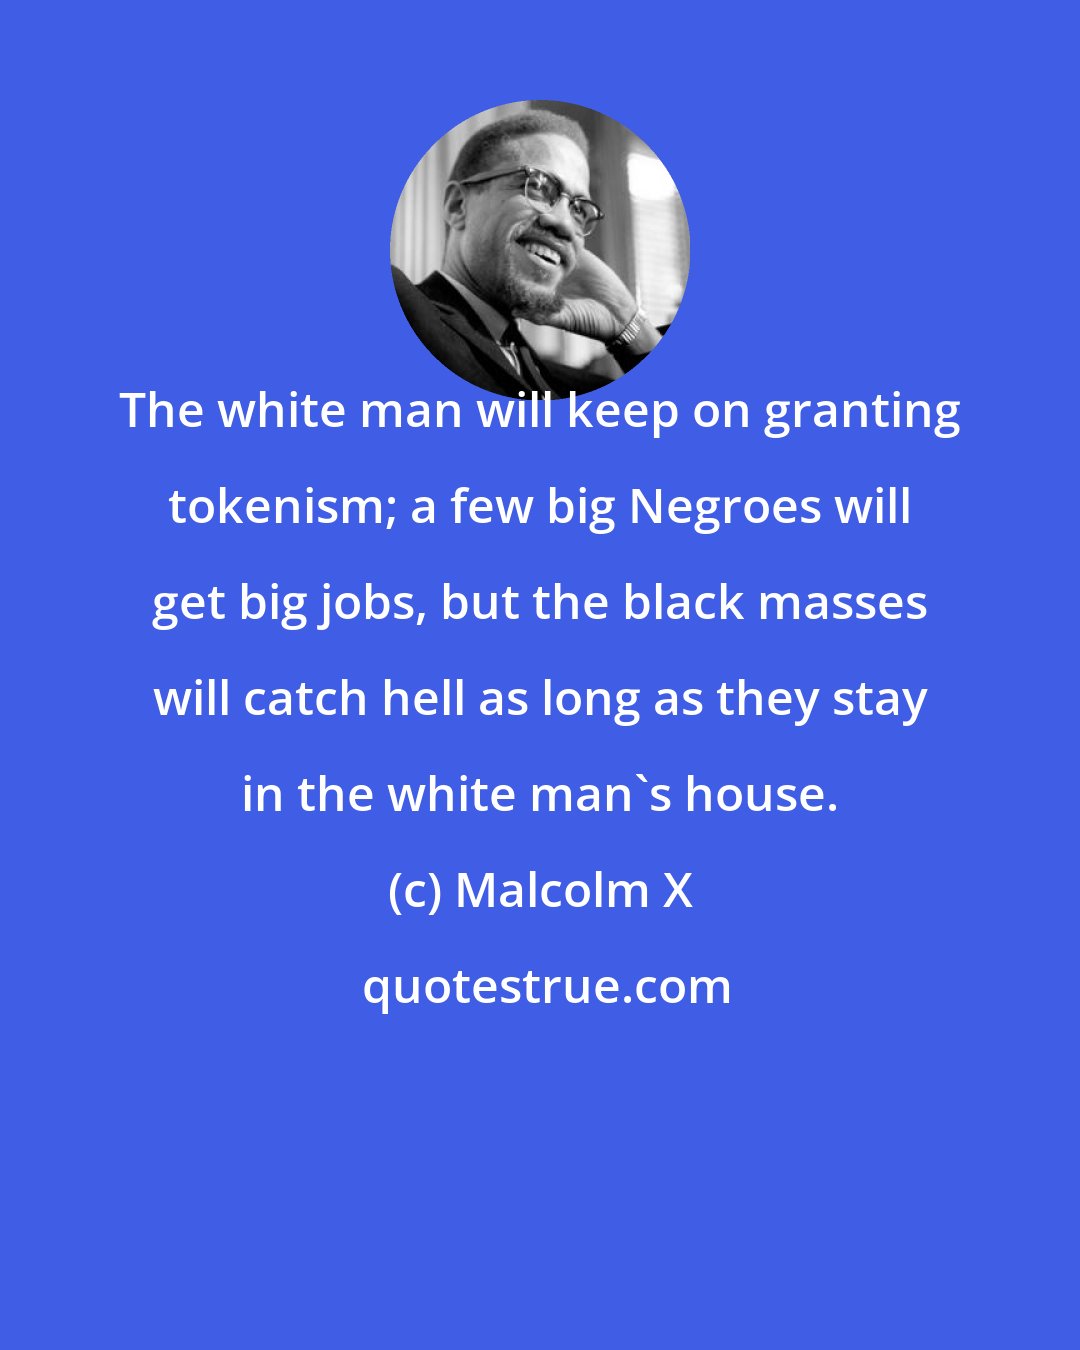 Malcolm X: The white man will keep on granting tokenism; a few big Negroes will get big jobs, but the black masses will catch hell as long as they stay in the white man's house.